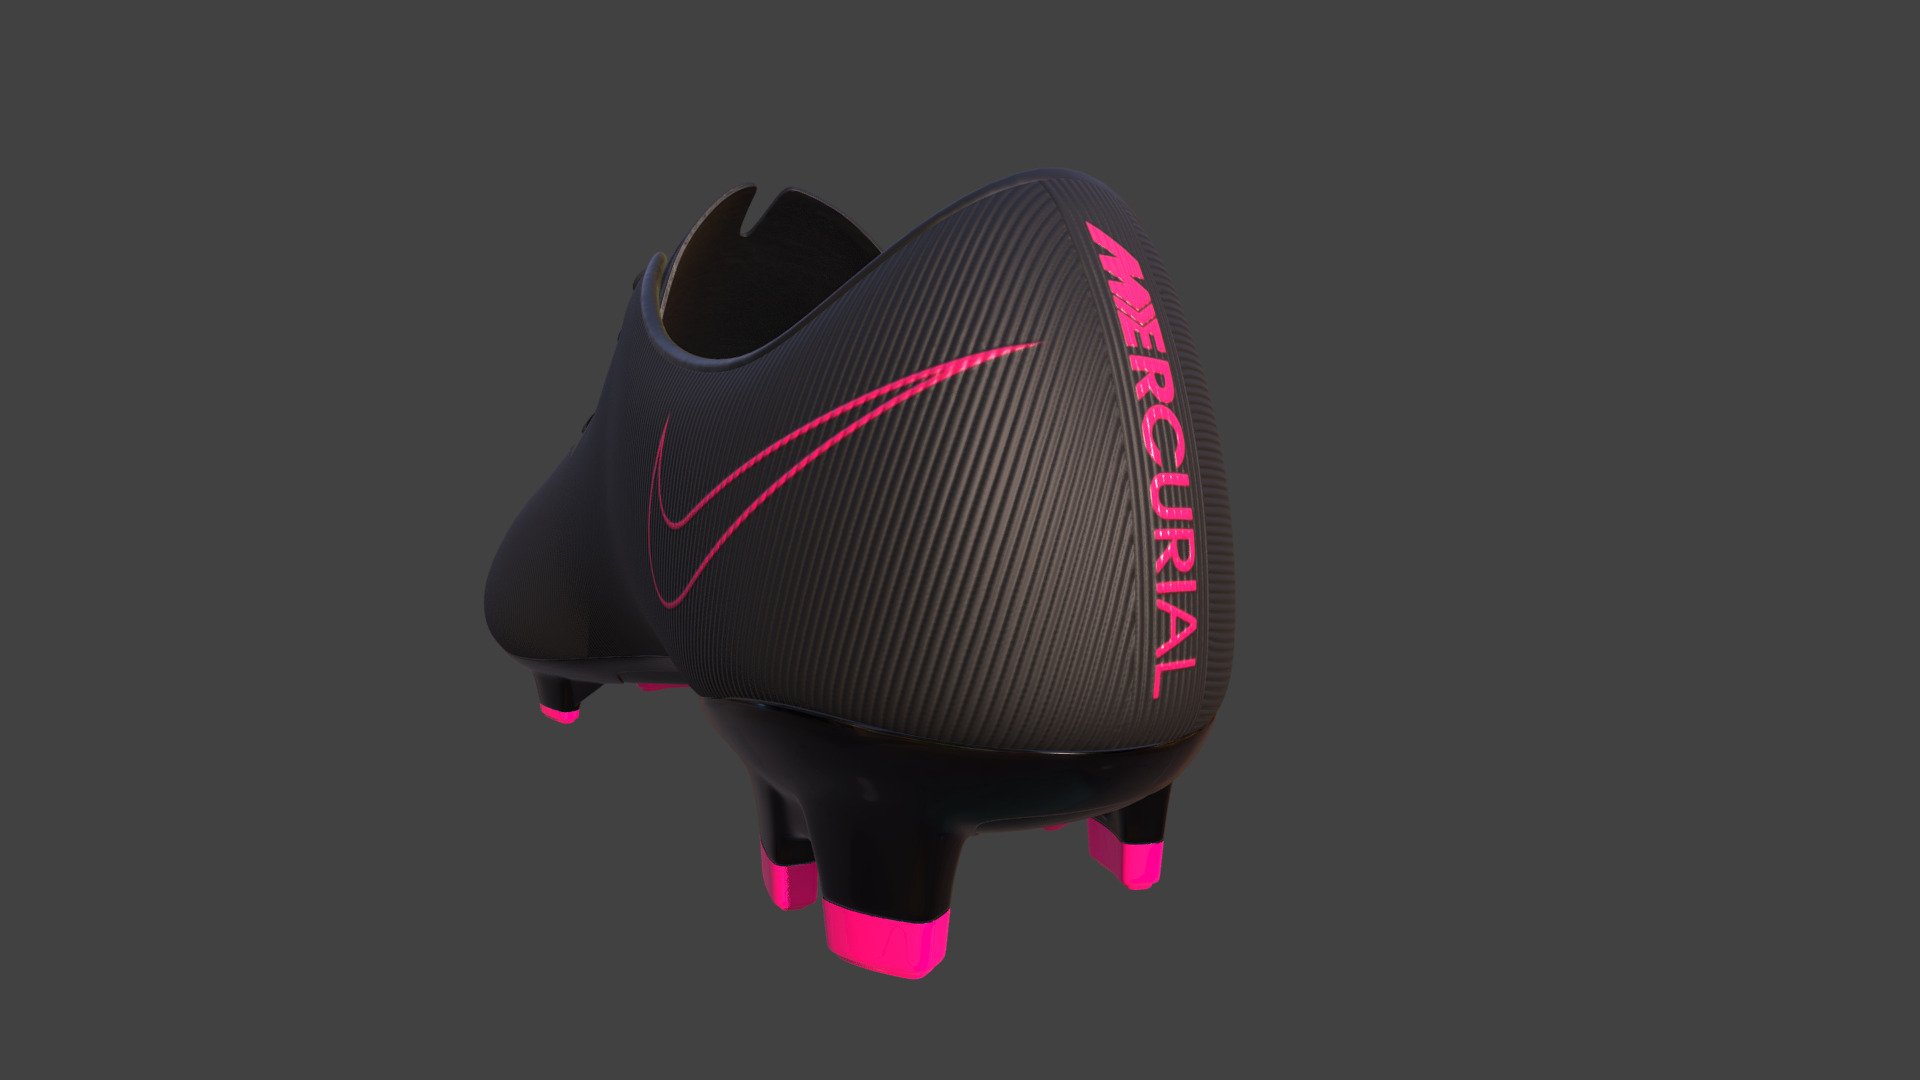 Mercurial Vapor X 2016 (WIP)




Old personal project, from model to textures. Want to apply new things i learned from UVs and texturing.

But Need to move on to next projects, gave too much time on it. Will work on more textures in the future since i enjoyed it.
 - Nike Mecurial Vapor X 2016 - 3D model by Kurt Nuñez (@kurt_bird) 3d model